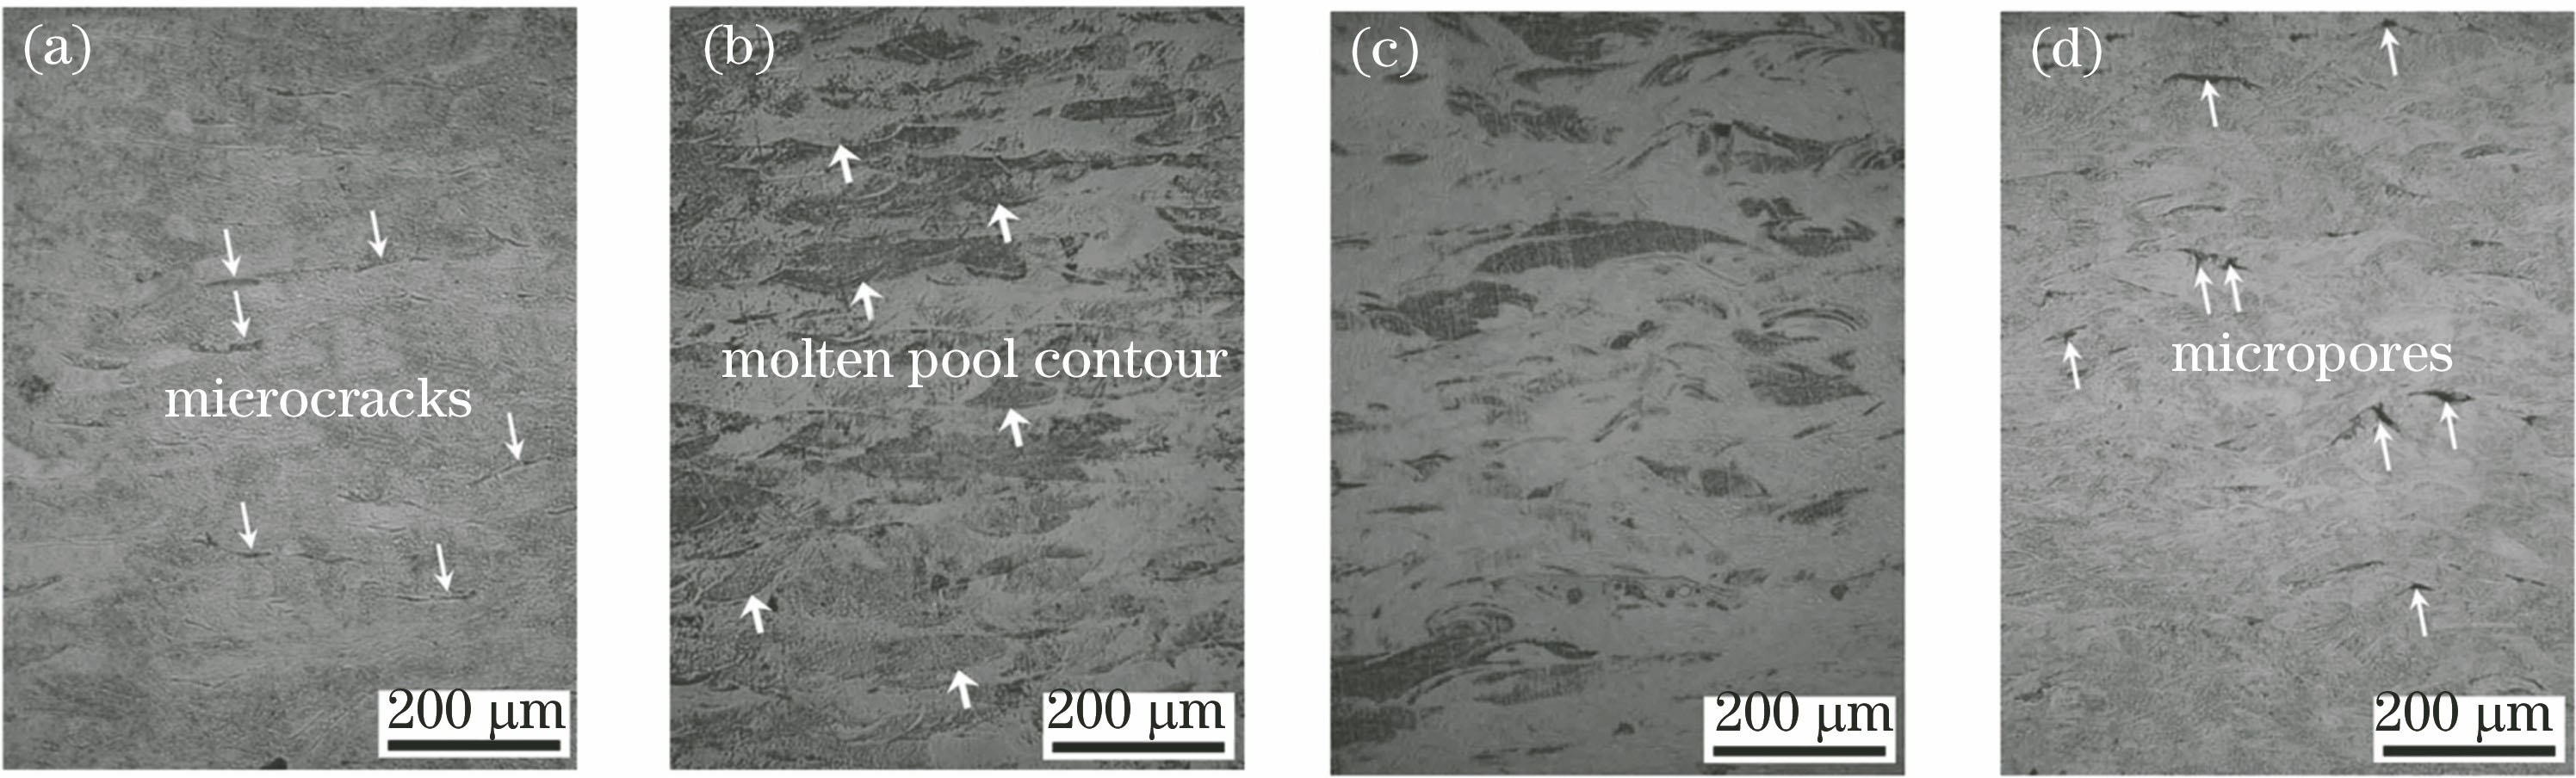 Optical microscopy images at cross sections of SLM-processed Ti parts under different scanning speeds[39]. (a) 100 mm/s; (b) 200 mm/s; (c) 300 mm/s; (d) 400 mm/s